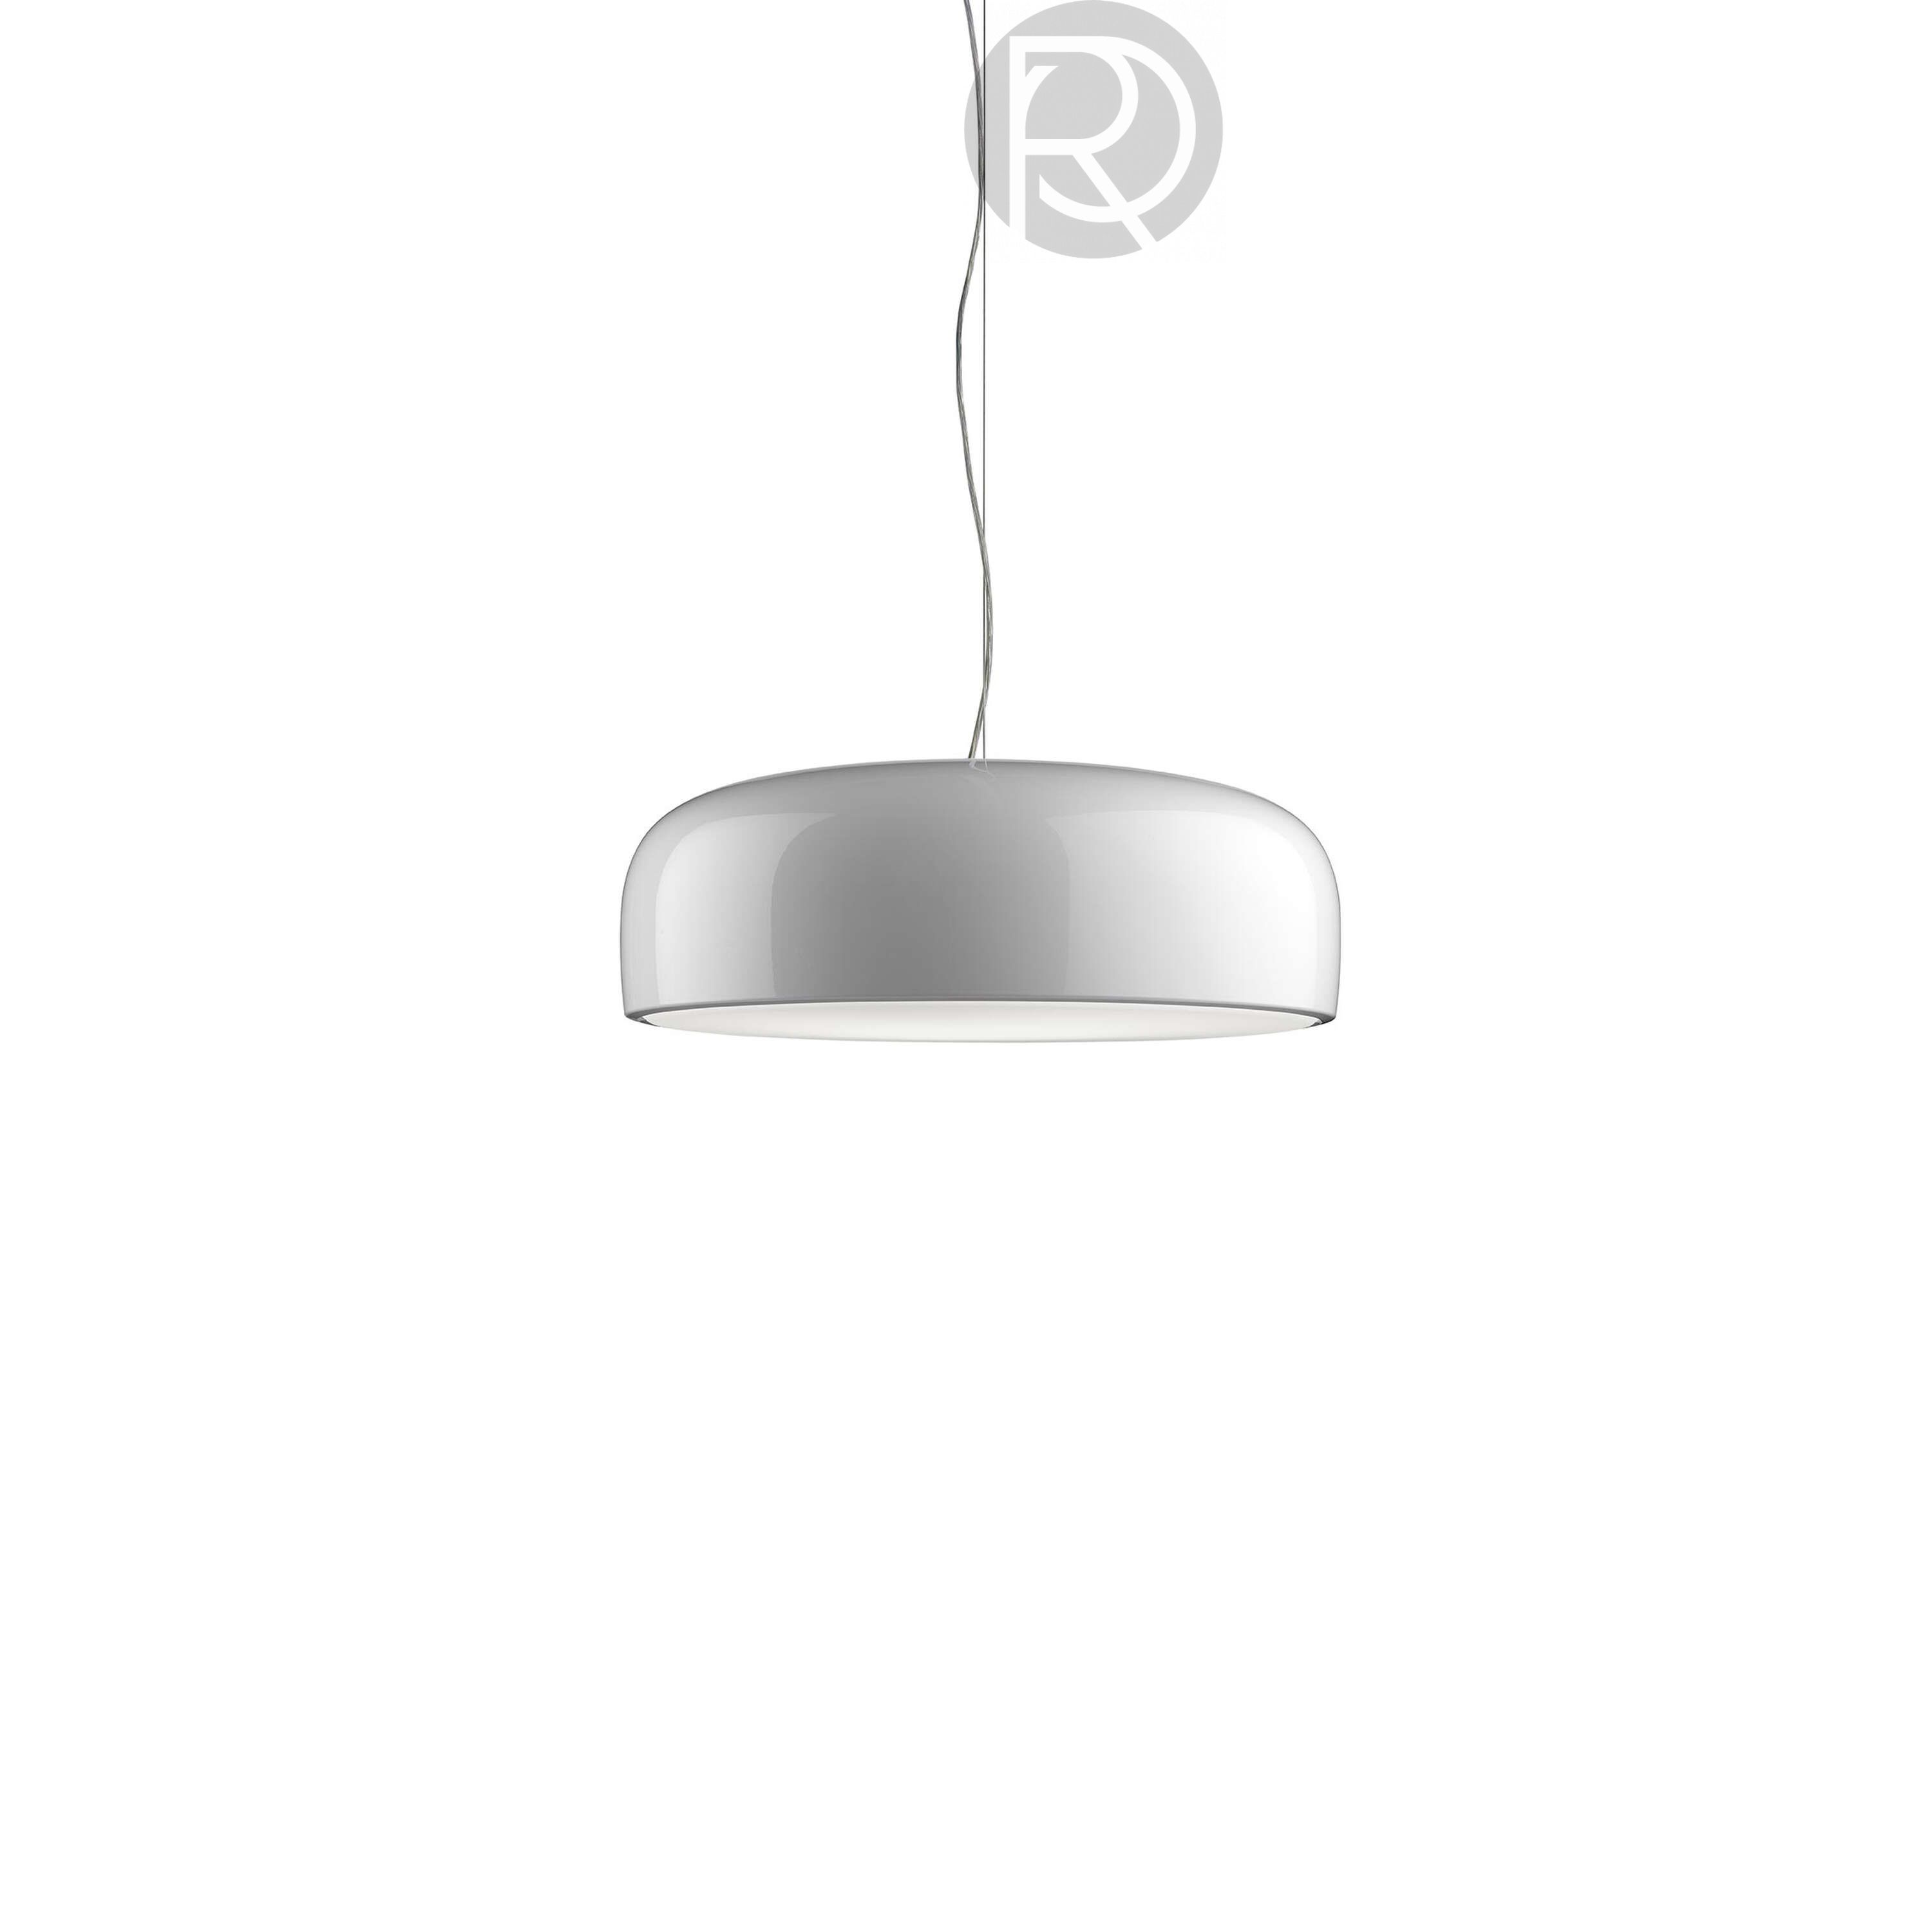 Hanging lamp SMITHFIELD by Flos